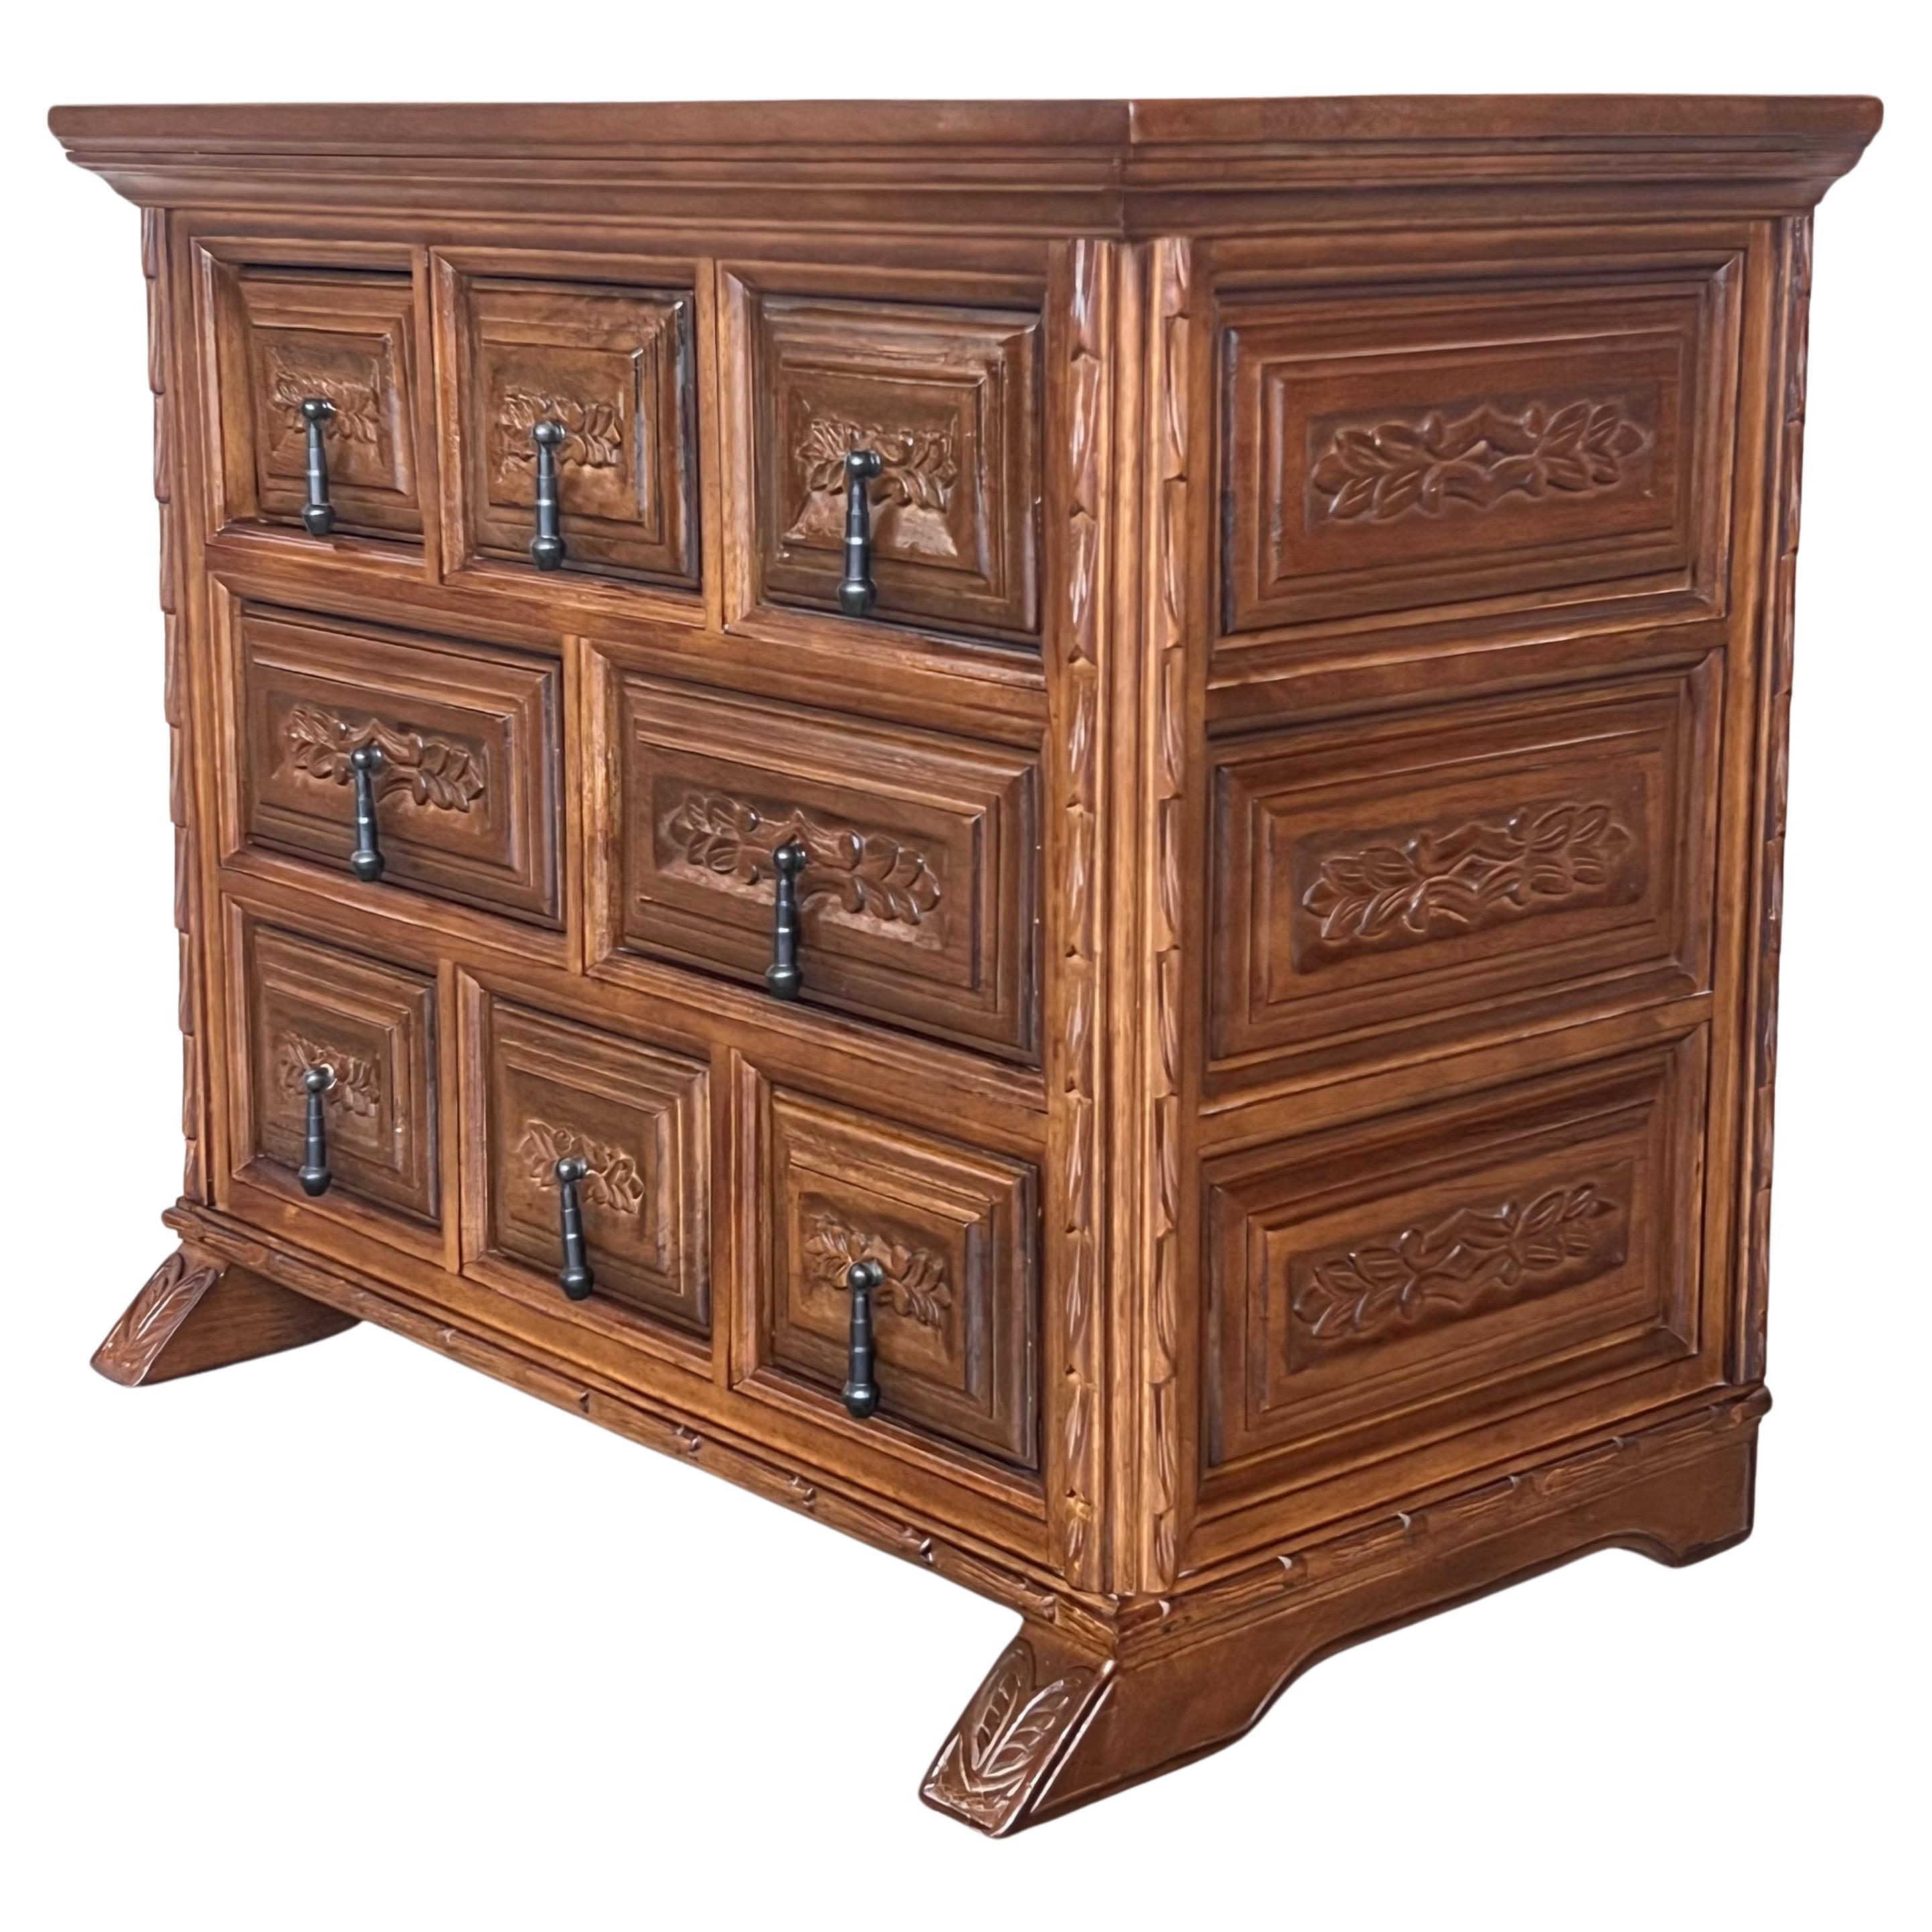 20th Catalan Spanish Baroque Carved Walnut Tuscan Chest of Drawers or Nightstand For Sale